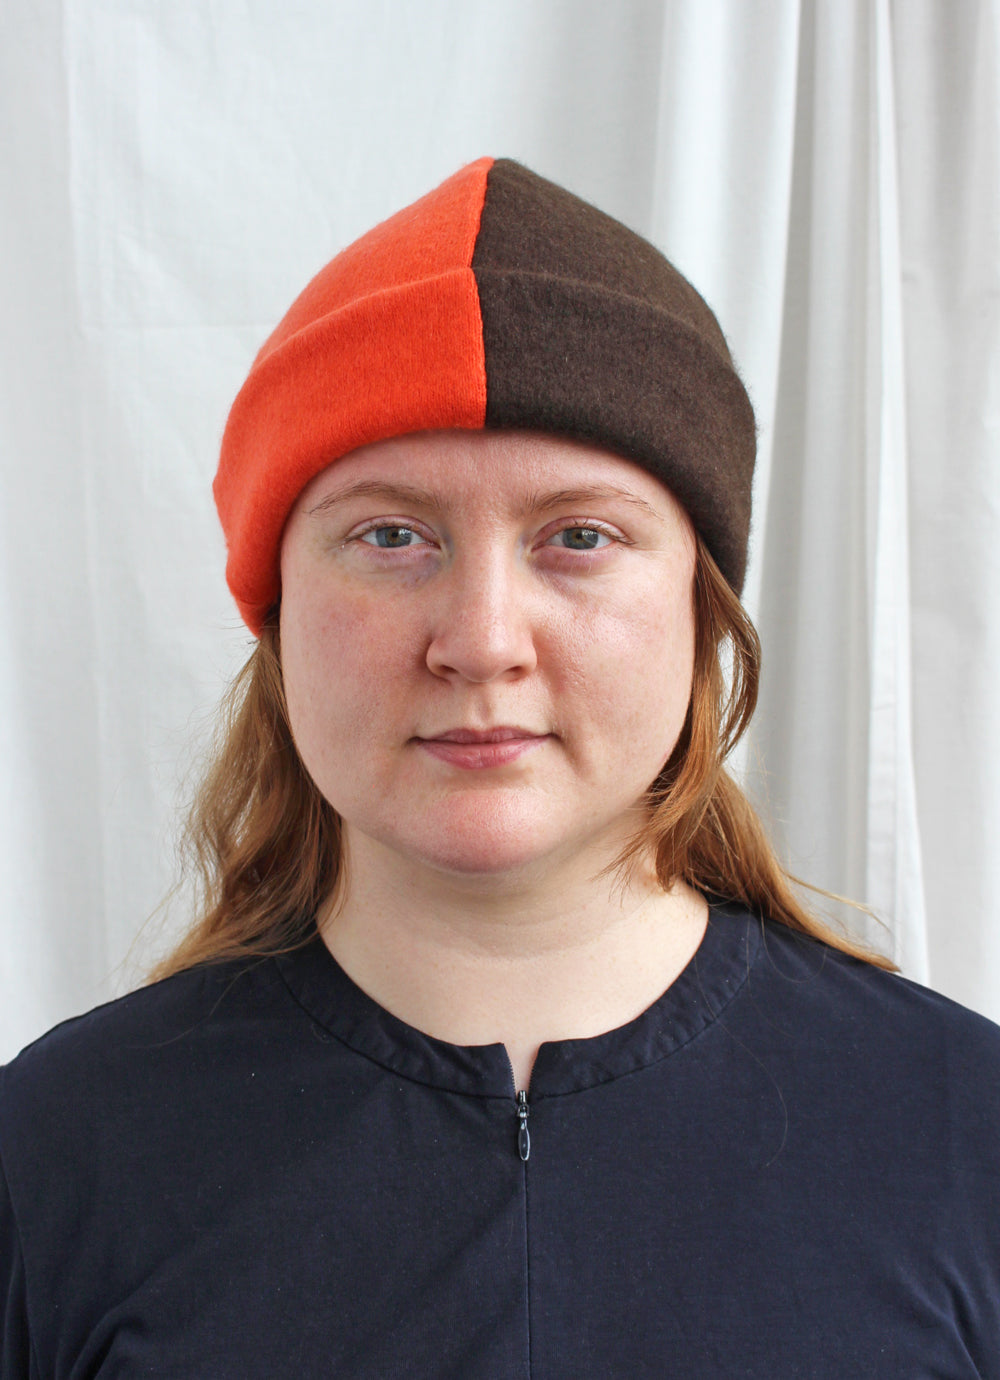 Reclaimed cashmere beanie hat